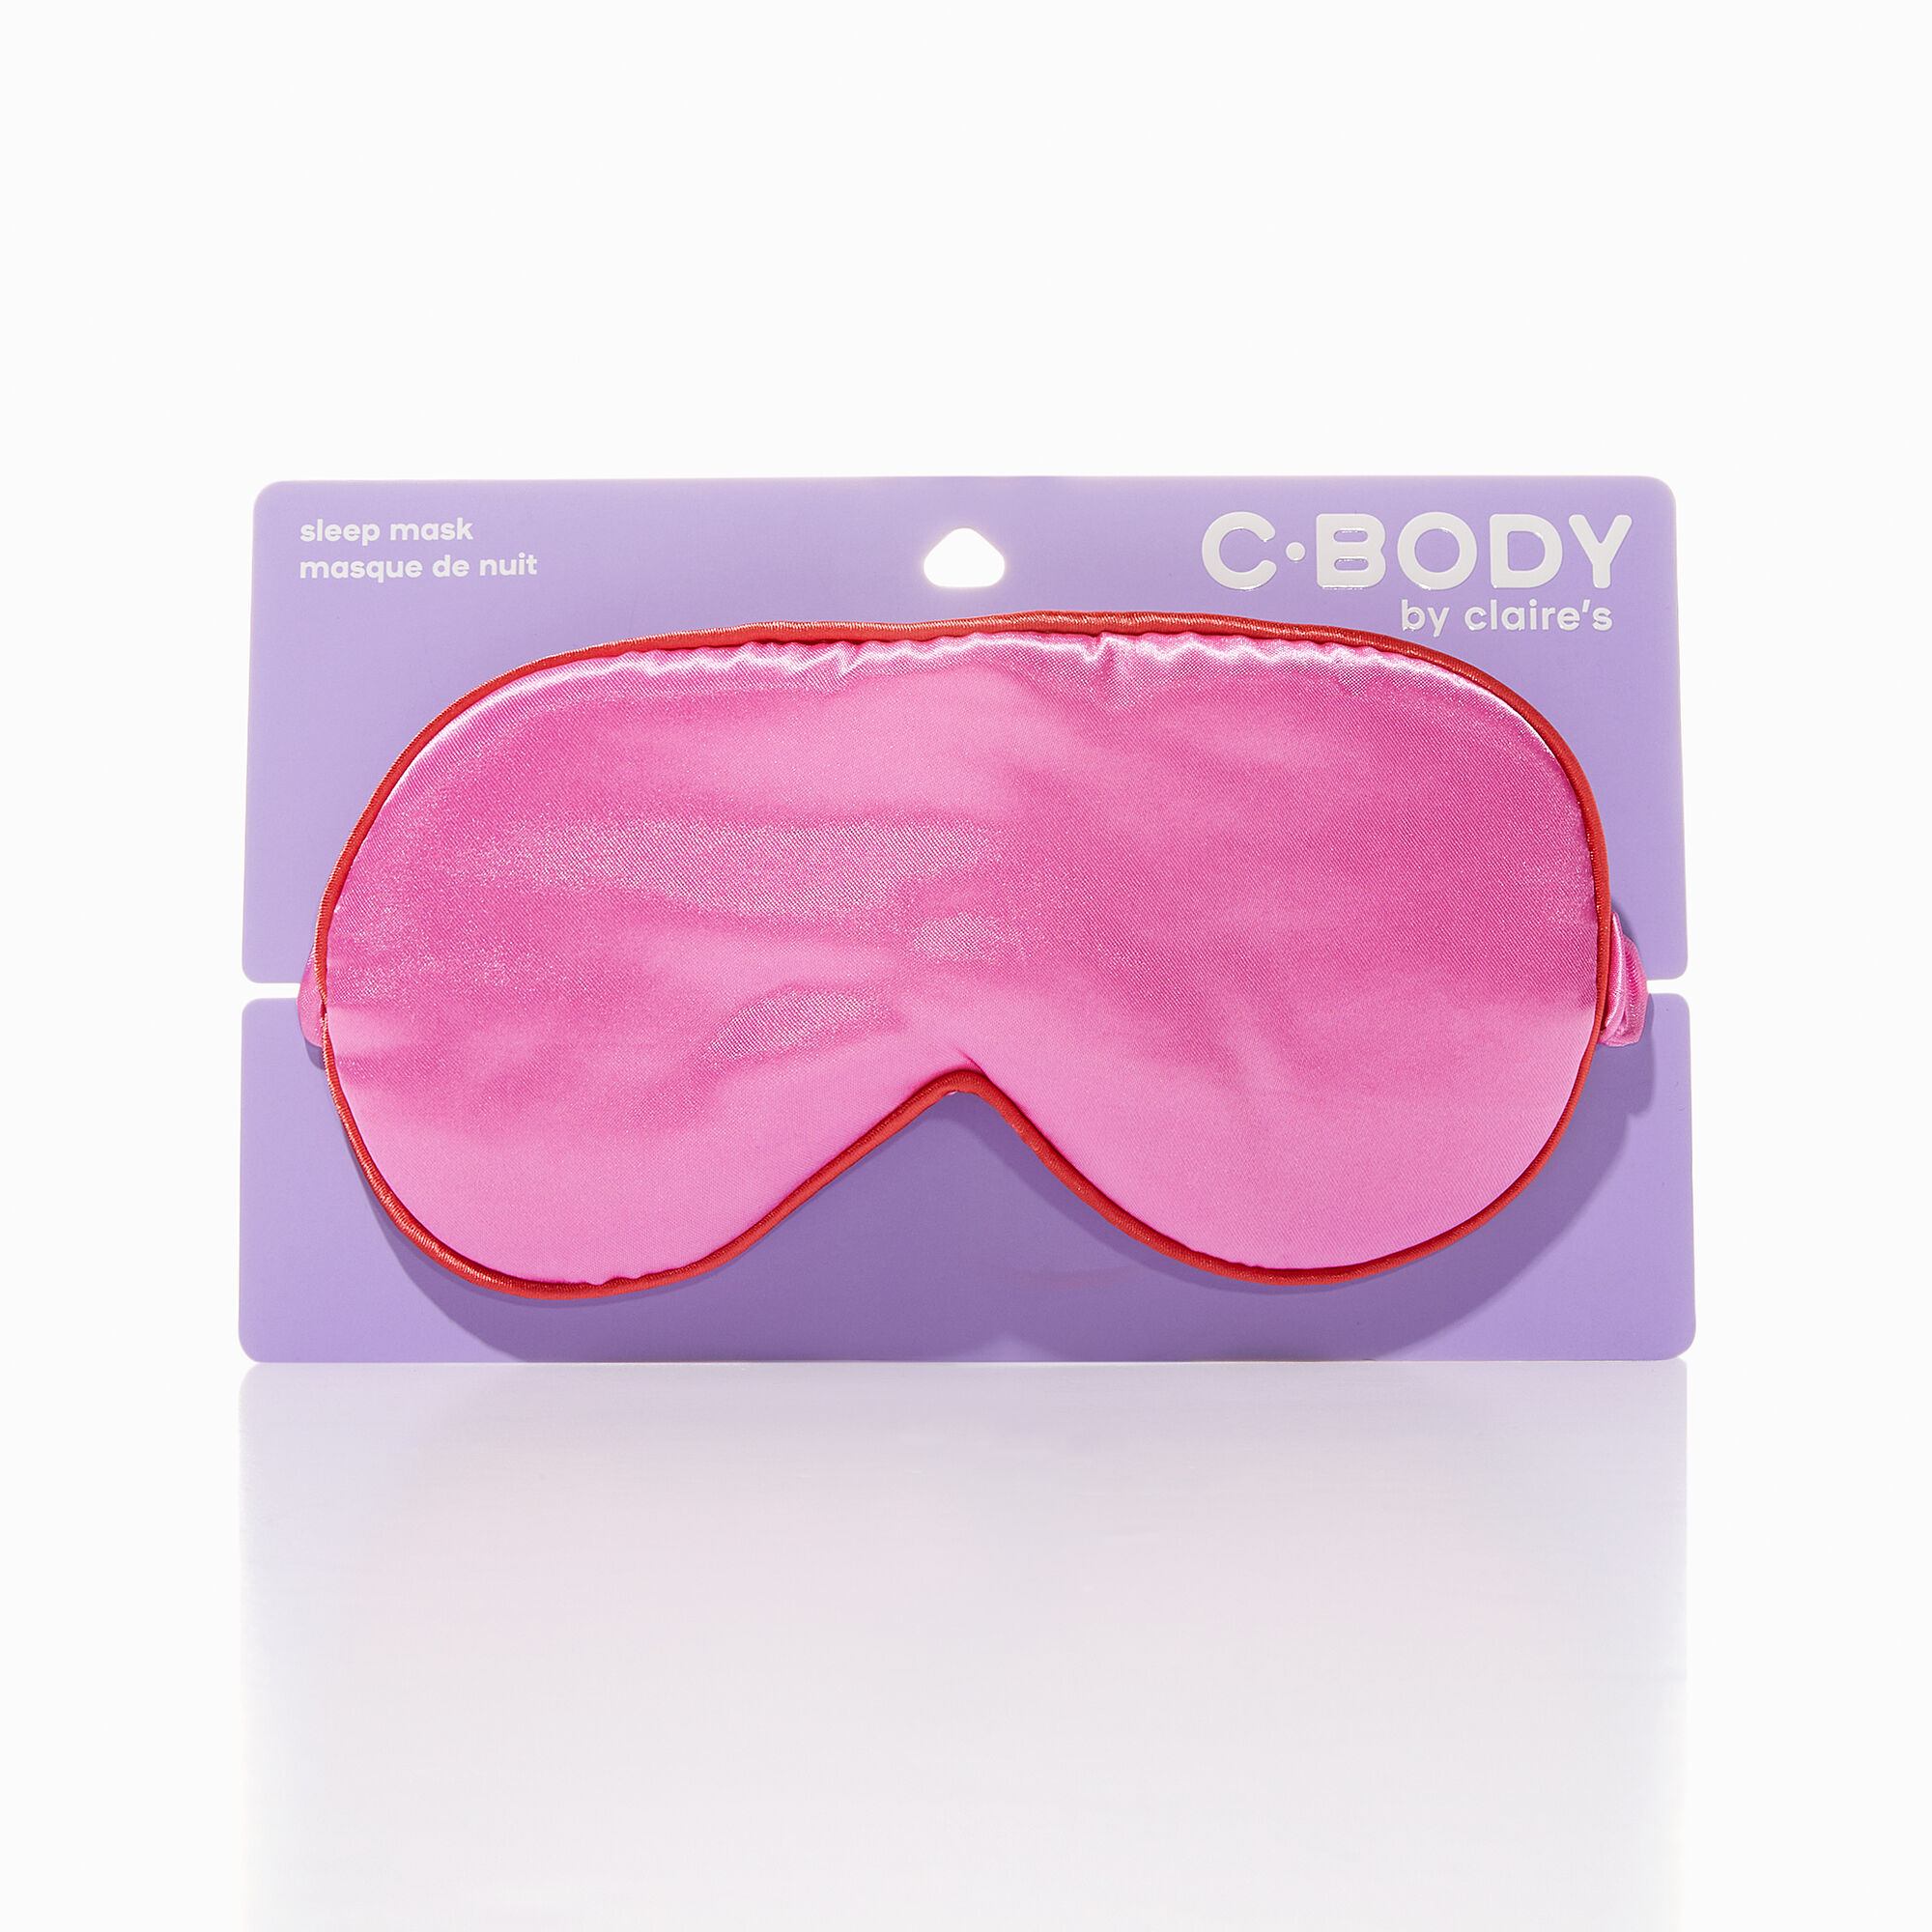 View Cbody By Claires Sleeping Mask Pink information